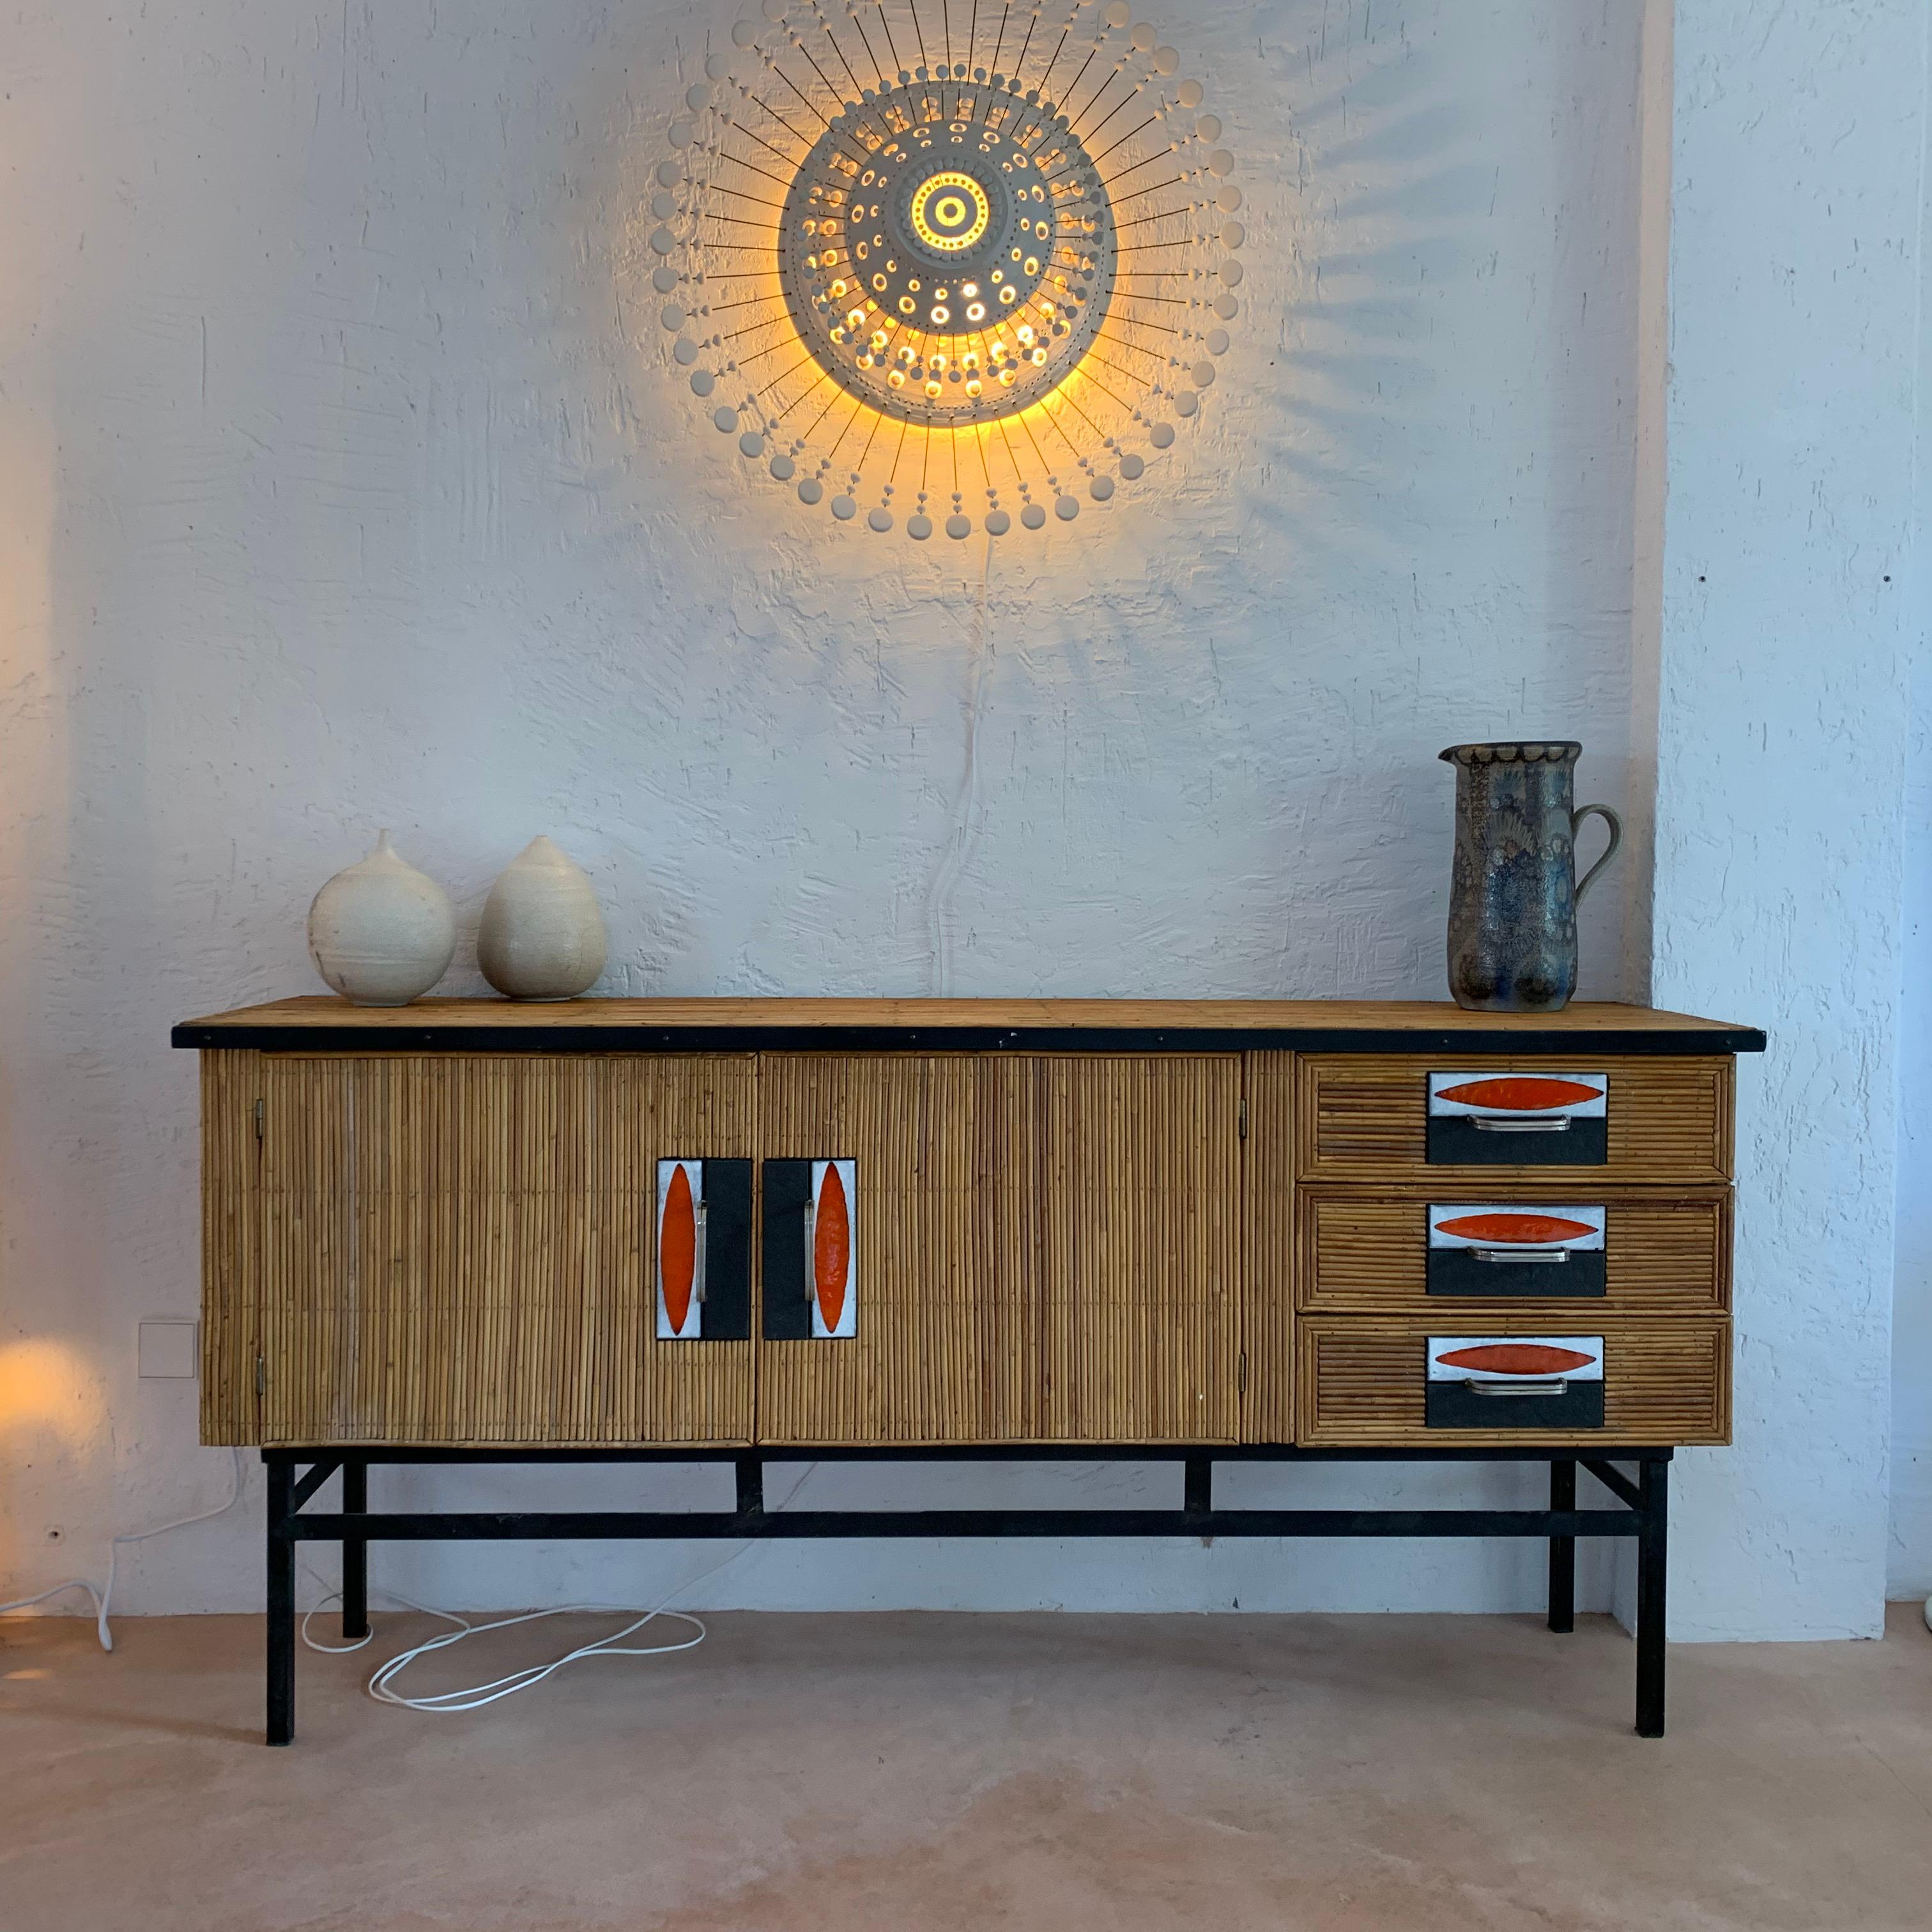 Audoux & Minet with Roger Capron Ceramic Tiles Sideboard in Rattan & metal, 1950 3